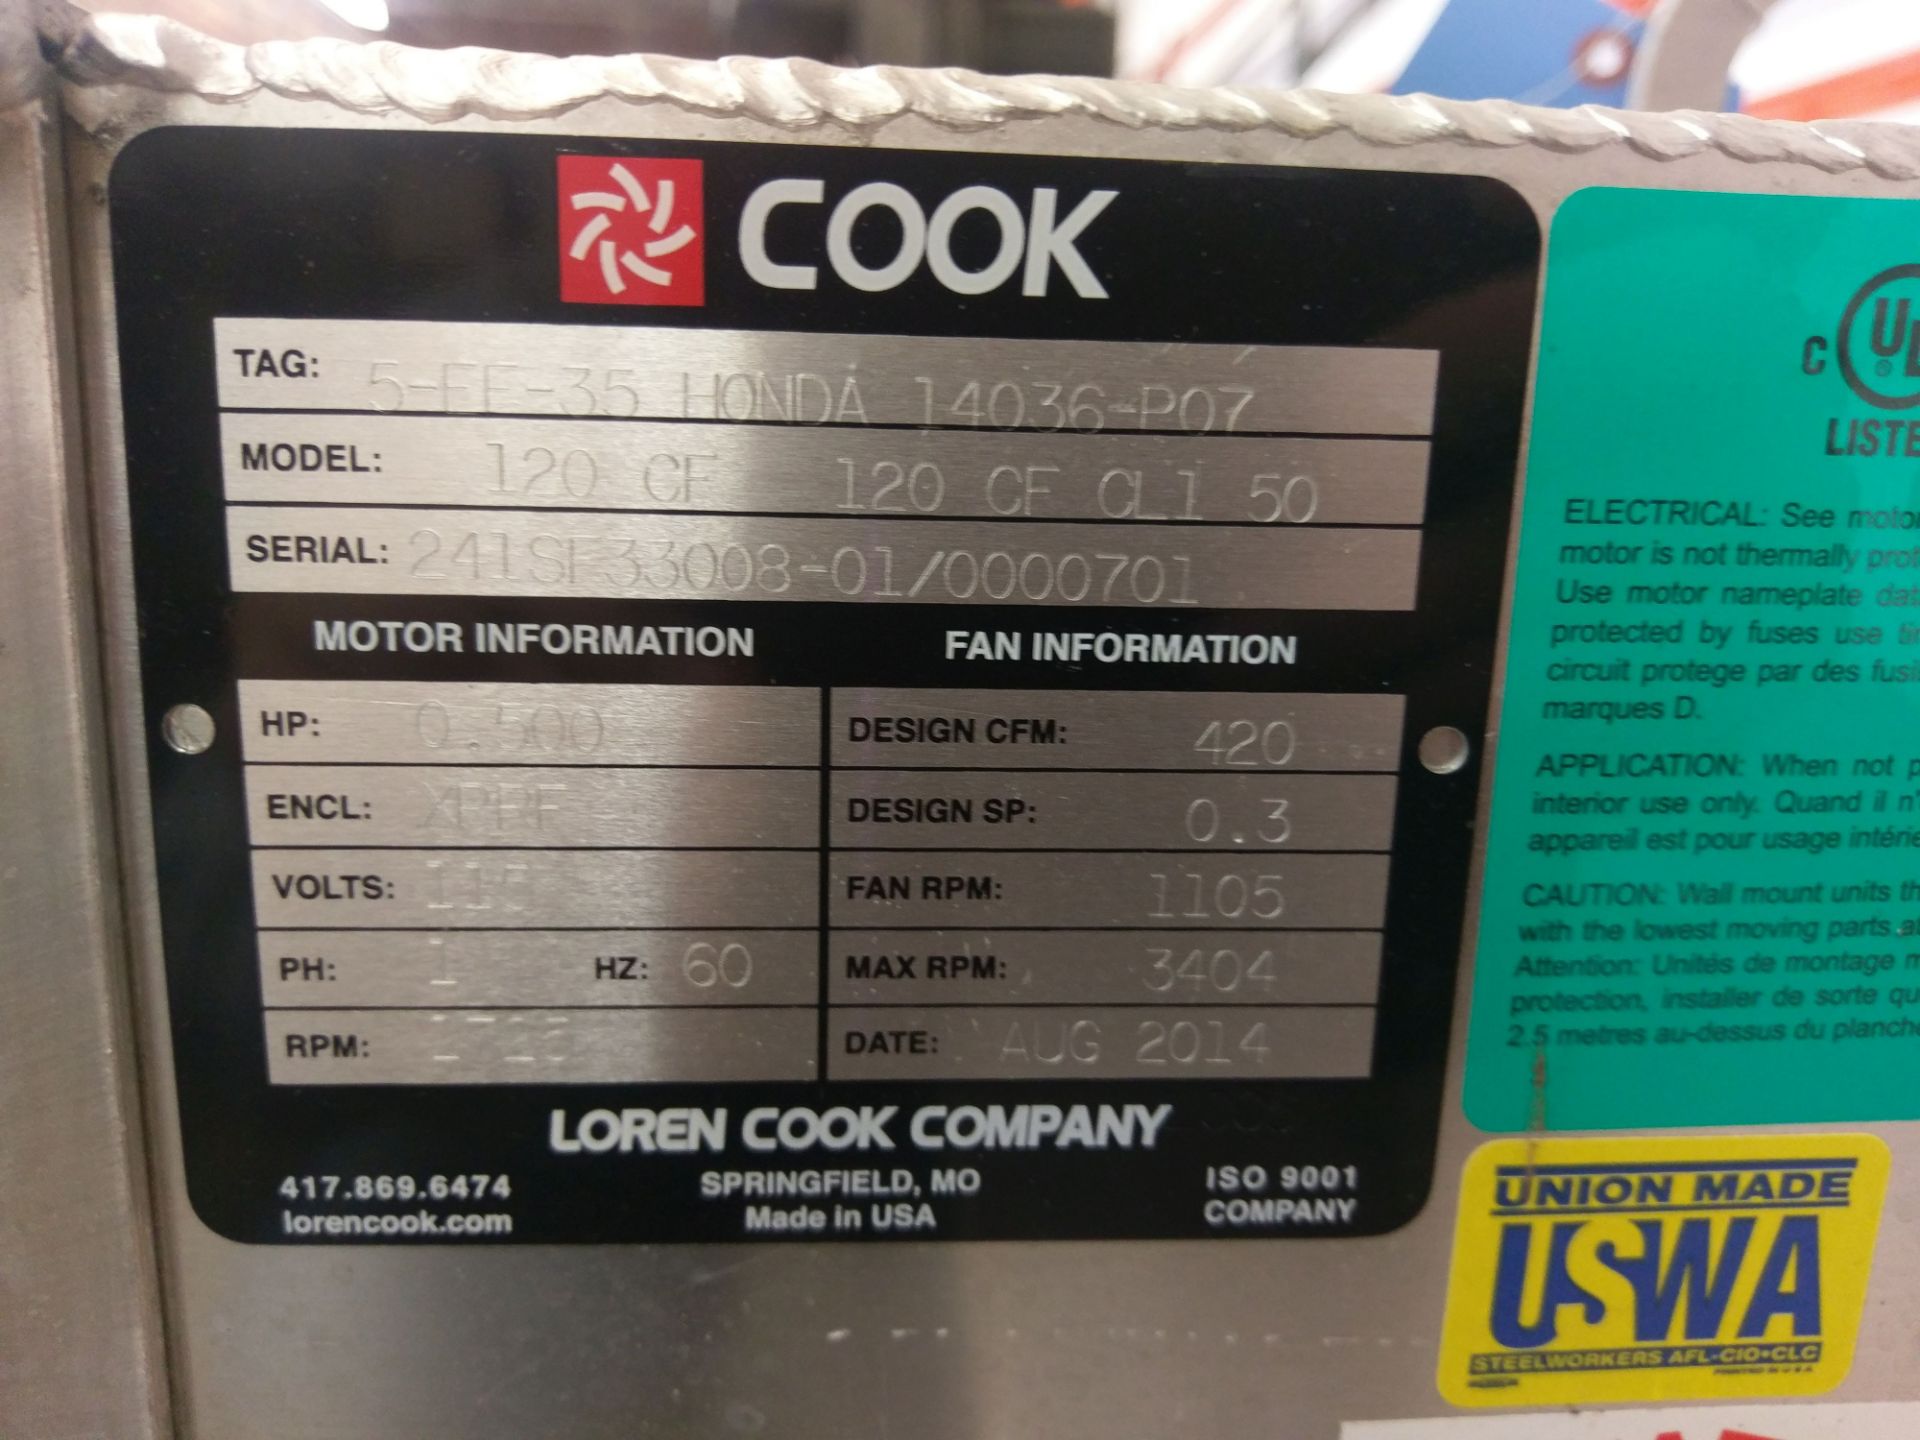 COOK MODEL 120CF BLOWER UNIT; S/N 241SF33008-01/0000701, 115 VOLT, SINGLE PHASE **LOCATED 3201 - Image 2 of 3